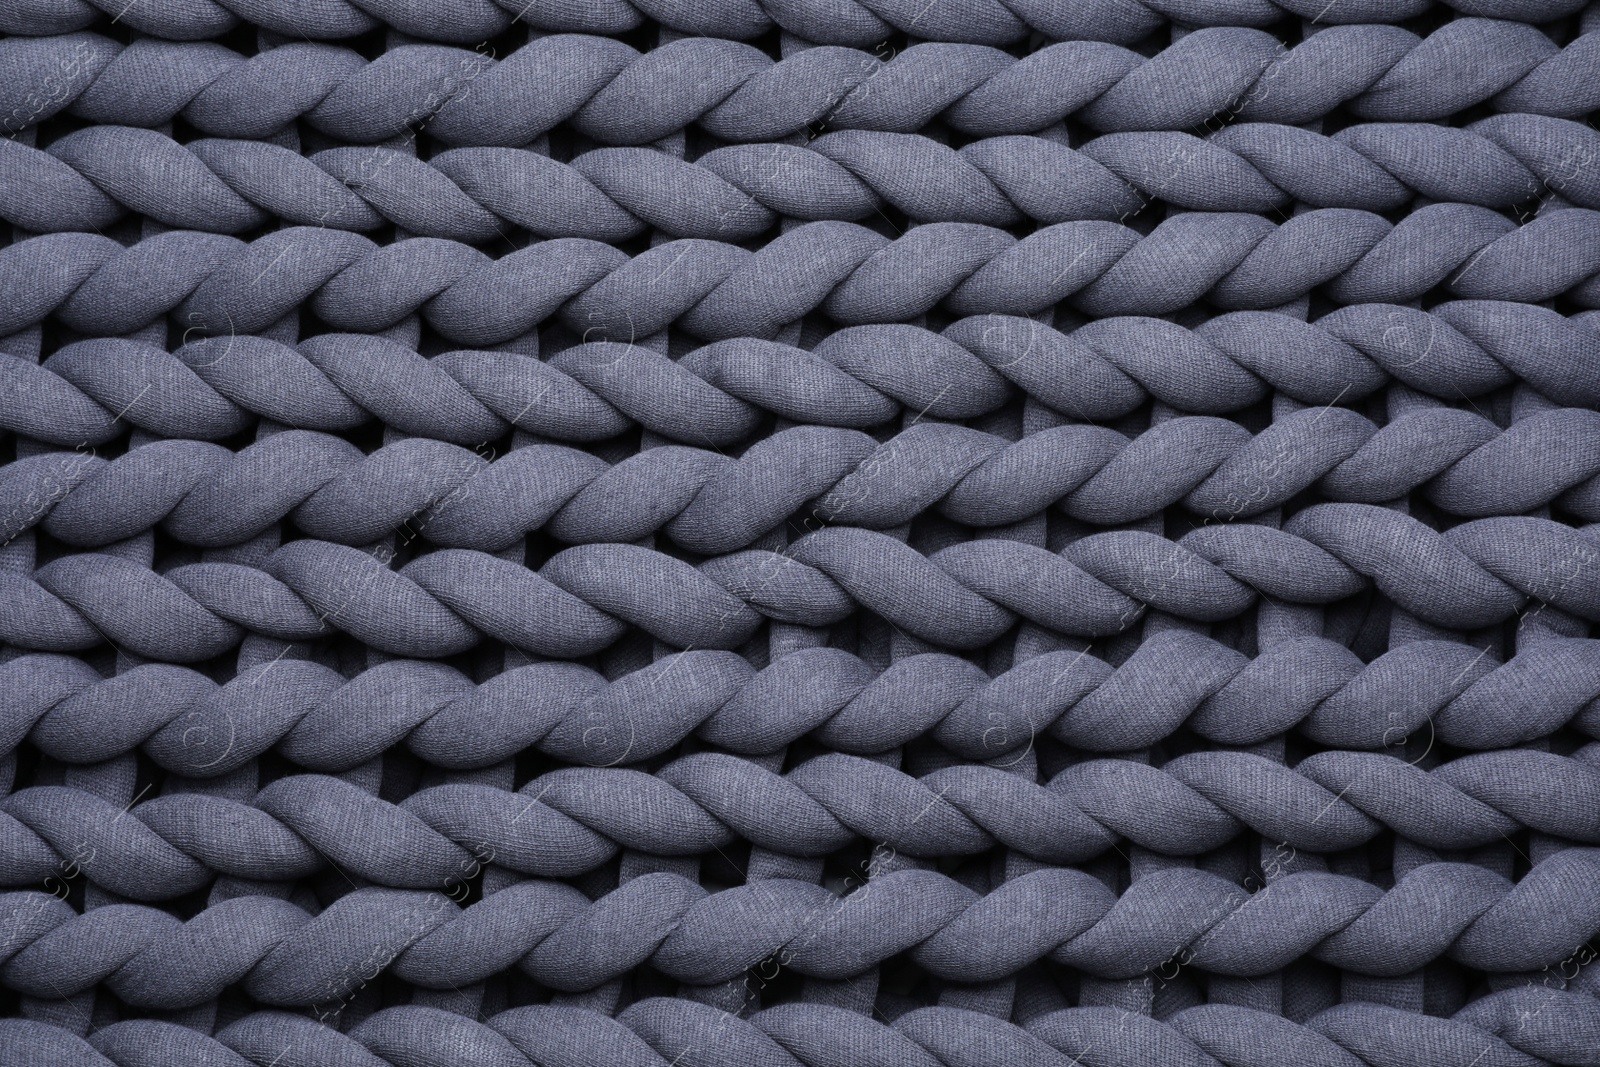 Photo of Top view of grey chunky knit blanket as background